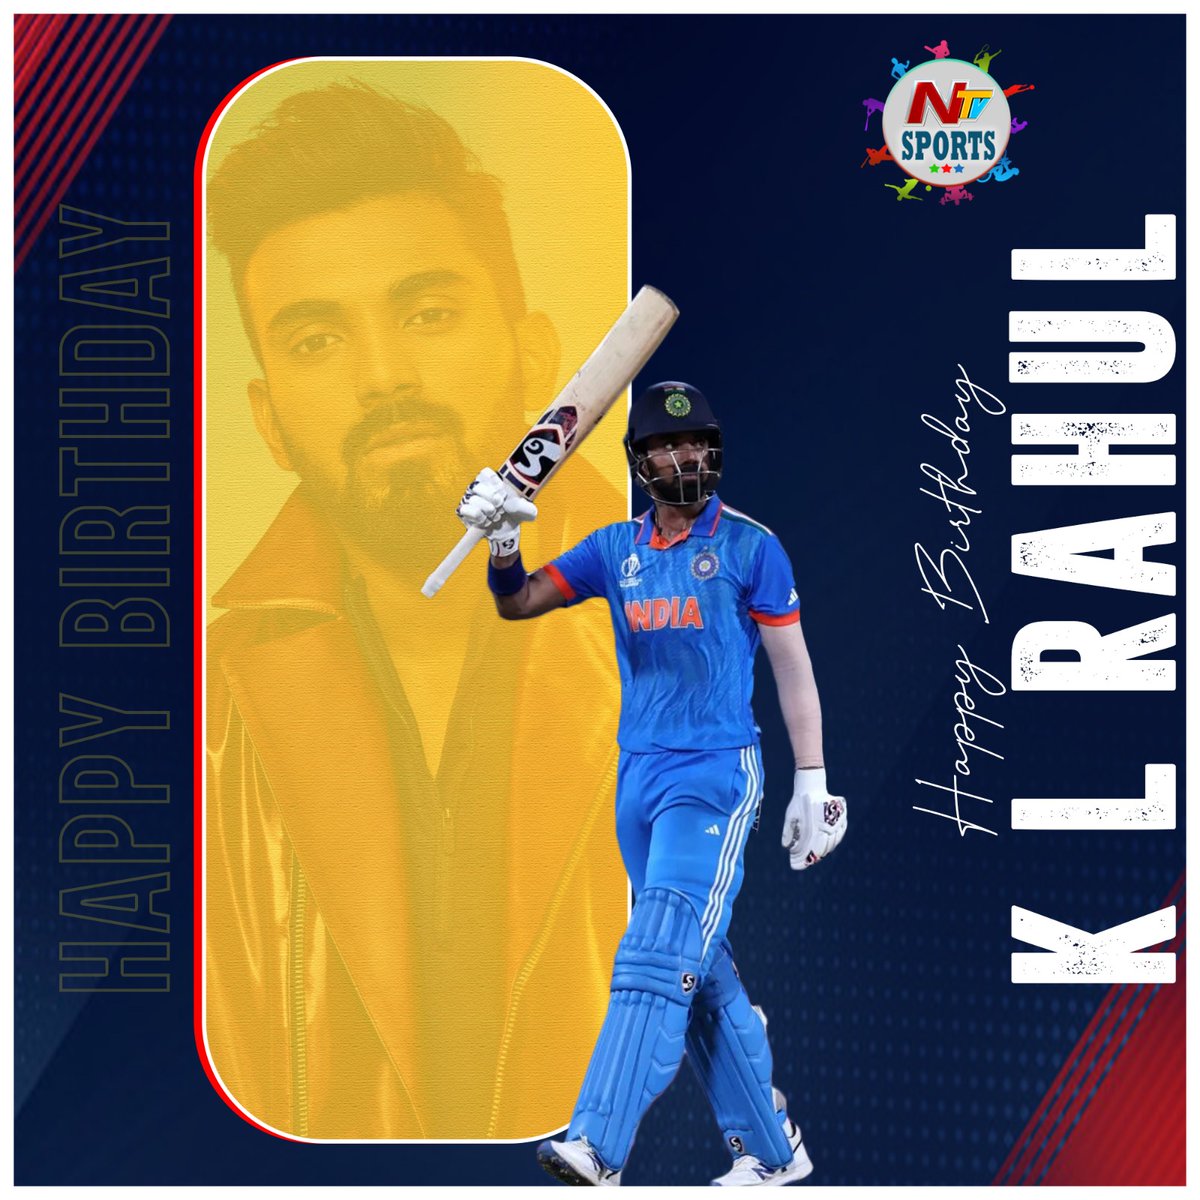 Join us in Wishing #KLRahul A Very Happy Birthday #HappyBirthdayKLRahul #HBDKlRahul #NTVSports